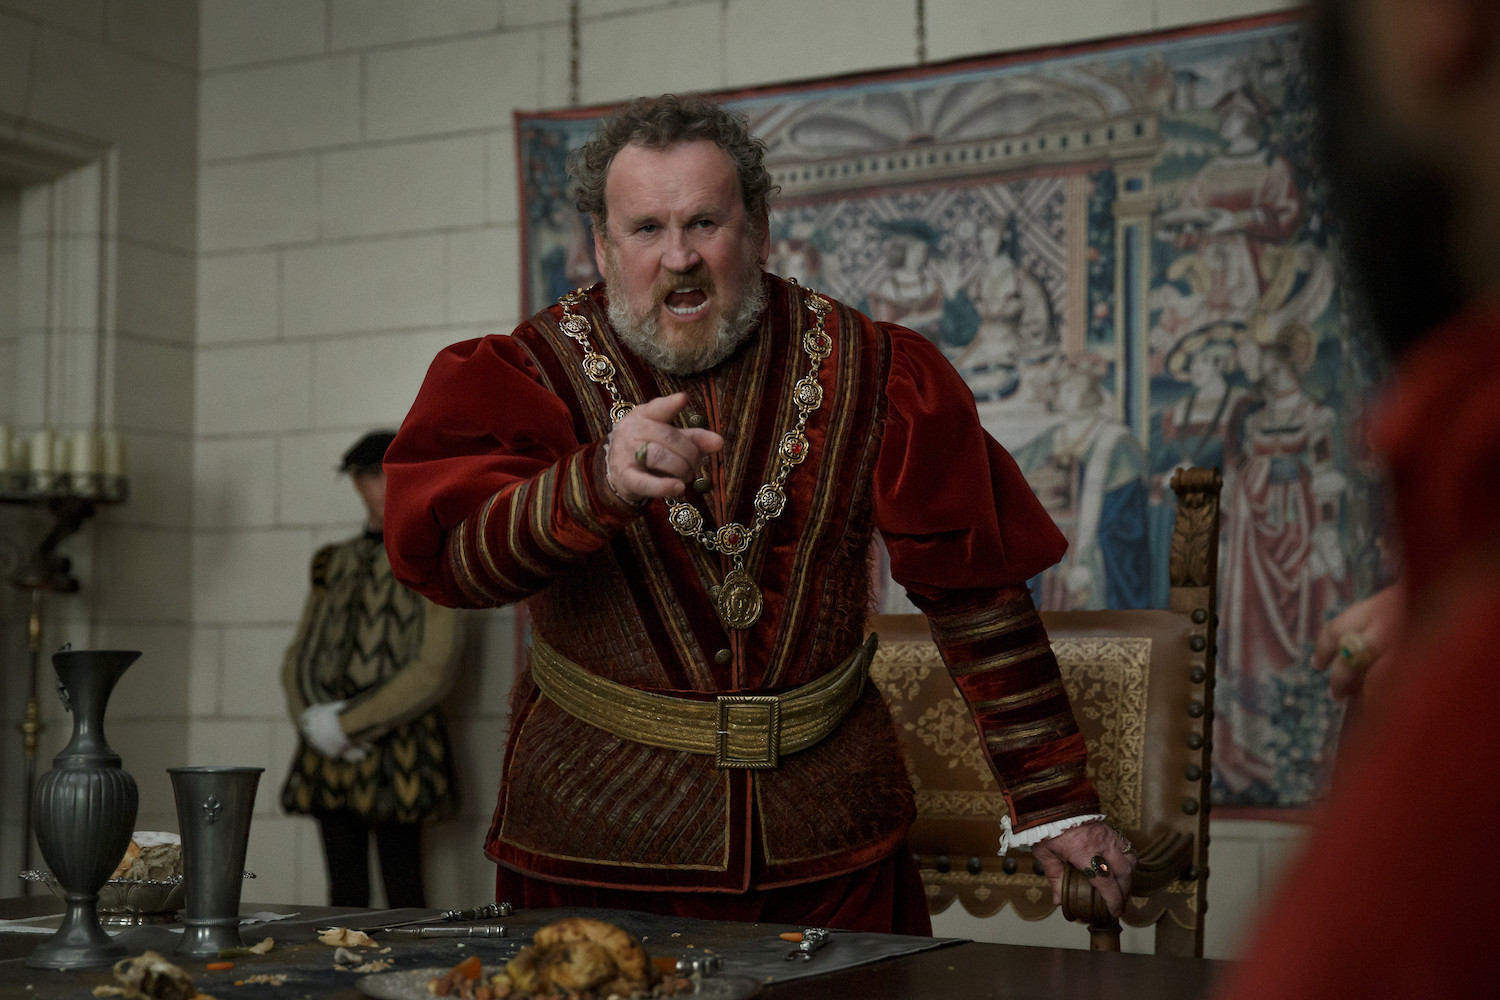 Picture shows: King Francis (Colm Meaney) shouting at someone.